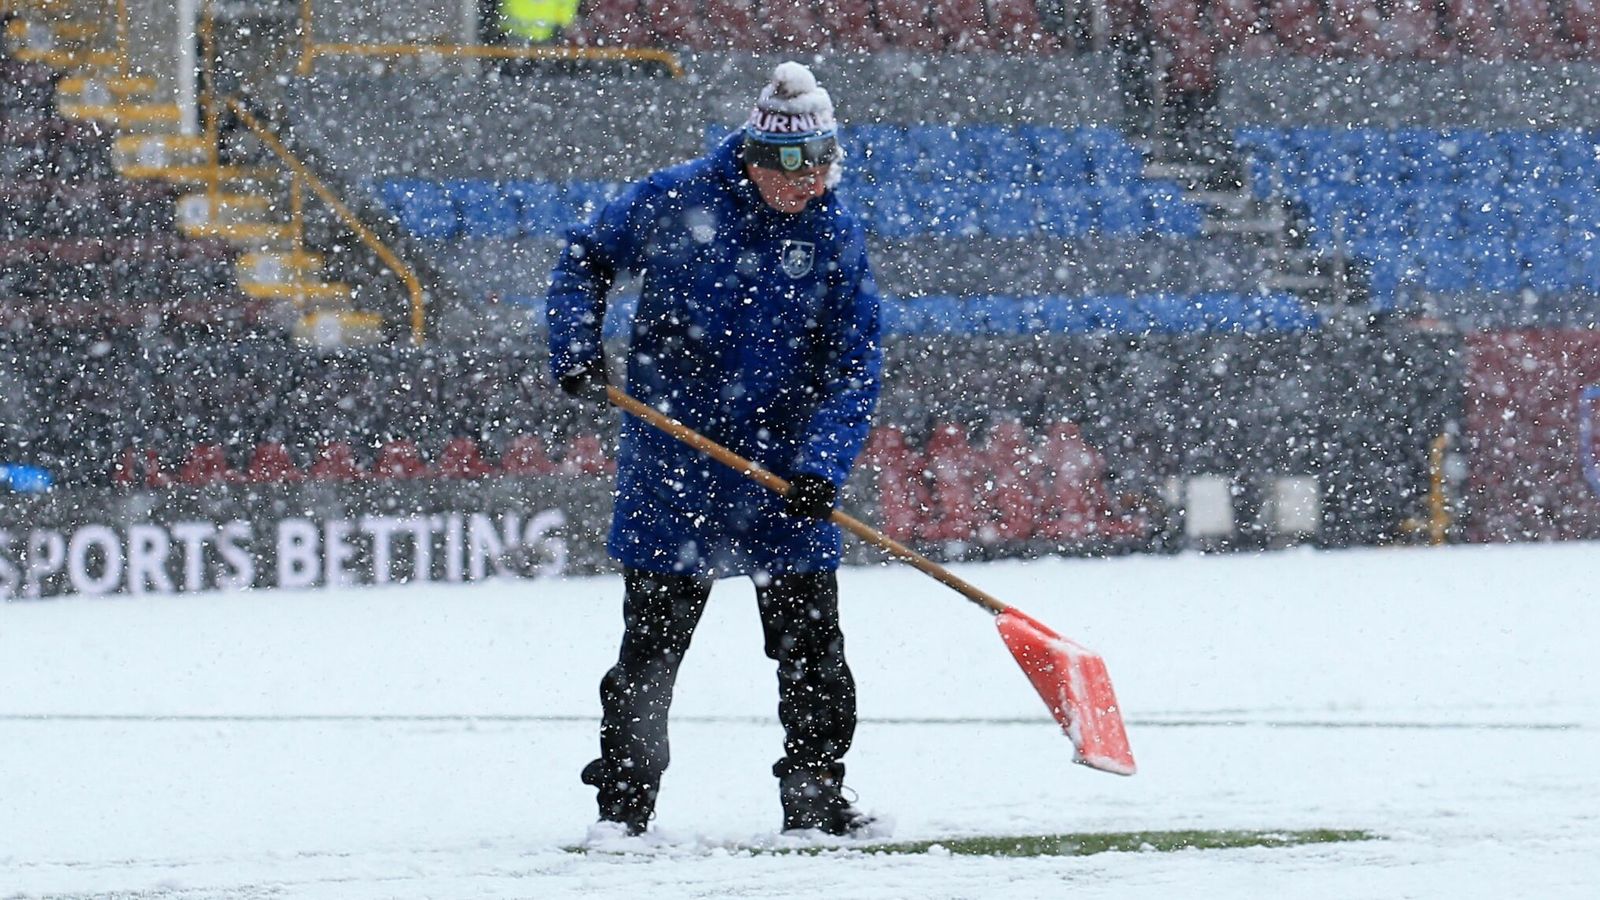 Burnley vs Tottenham: Premier League clash called off after heavy snow covers Turf Moor pitch